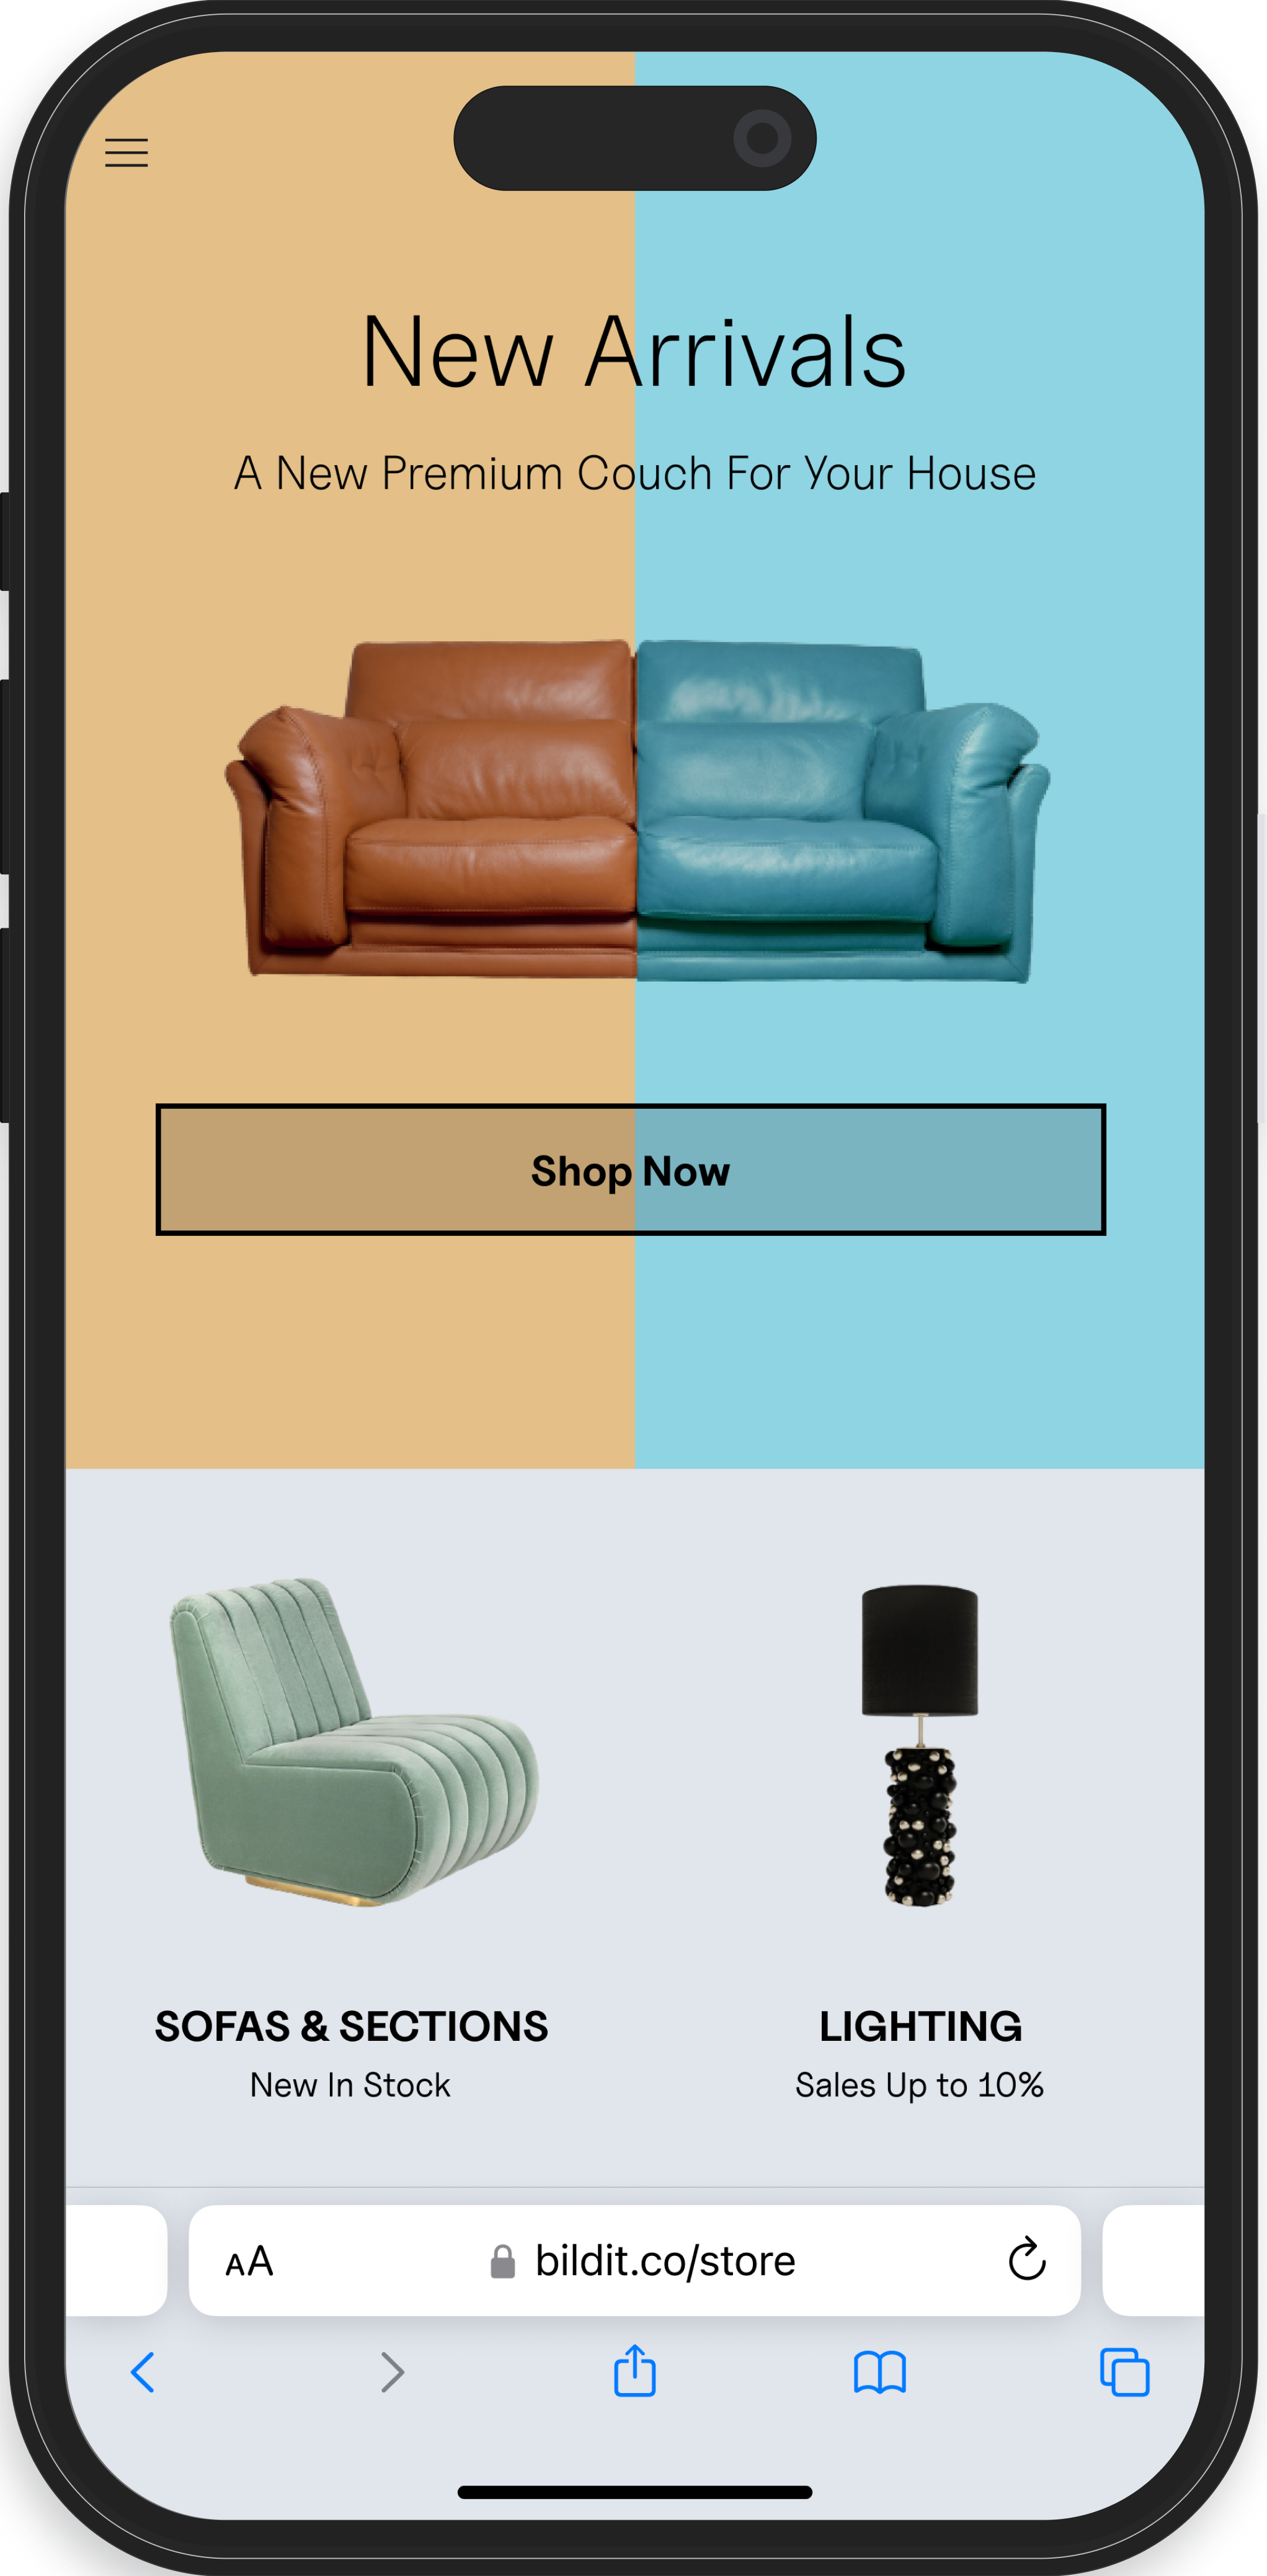 The image shows a smartphone screen with an online furniture store interface. The upper section displays a banner for 'New Arrivals', featuring a side-by-side image of a brown and a blue couch with a 'Shop Now' button below. The lower section highlights categories 'SOFAS & SECTIONS' and 'LIGHTING' with images of a green armchair and a black lamp, respectively, and notes on current stock and sales.